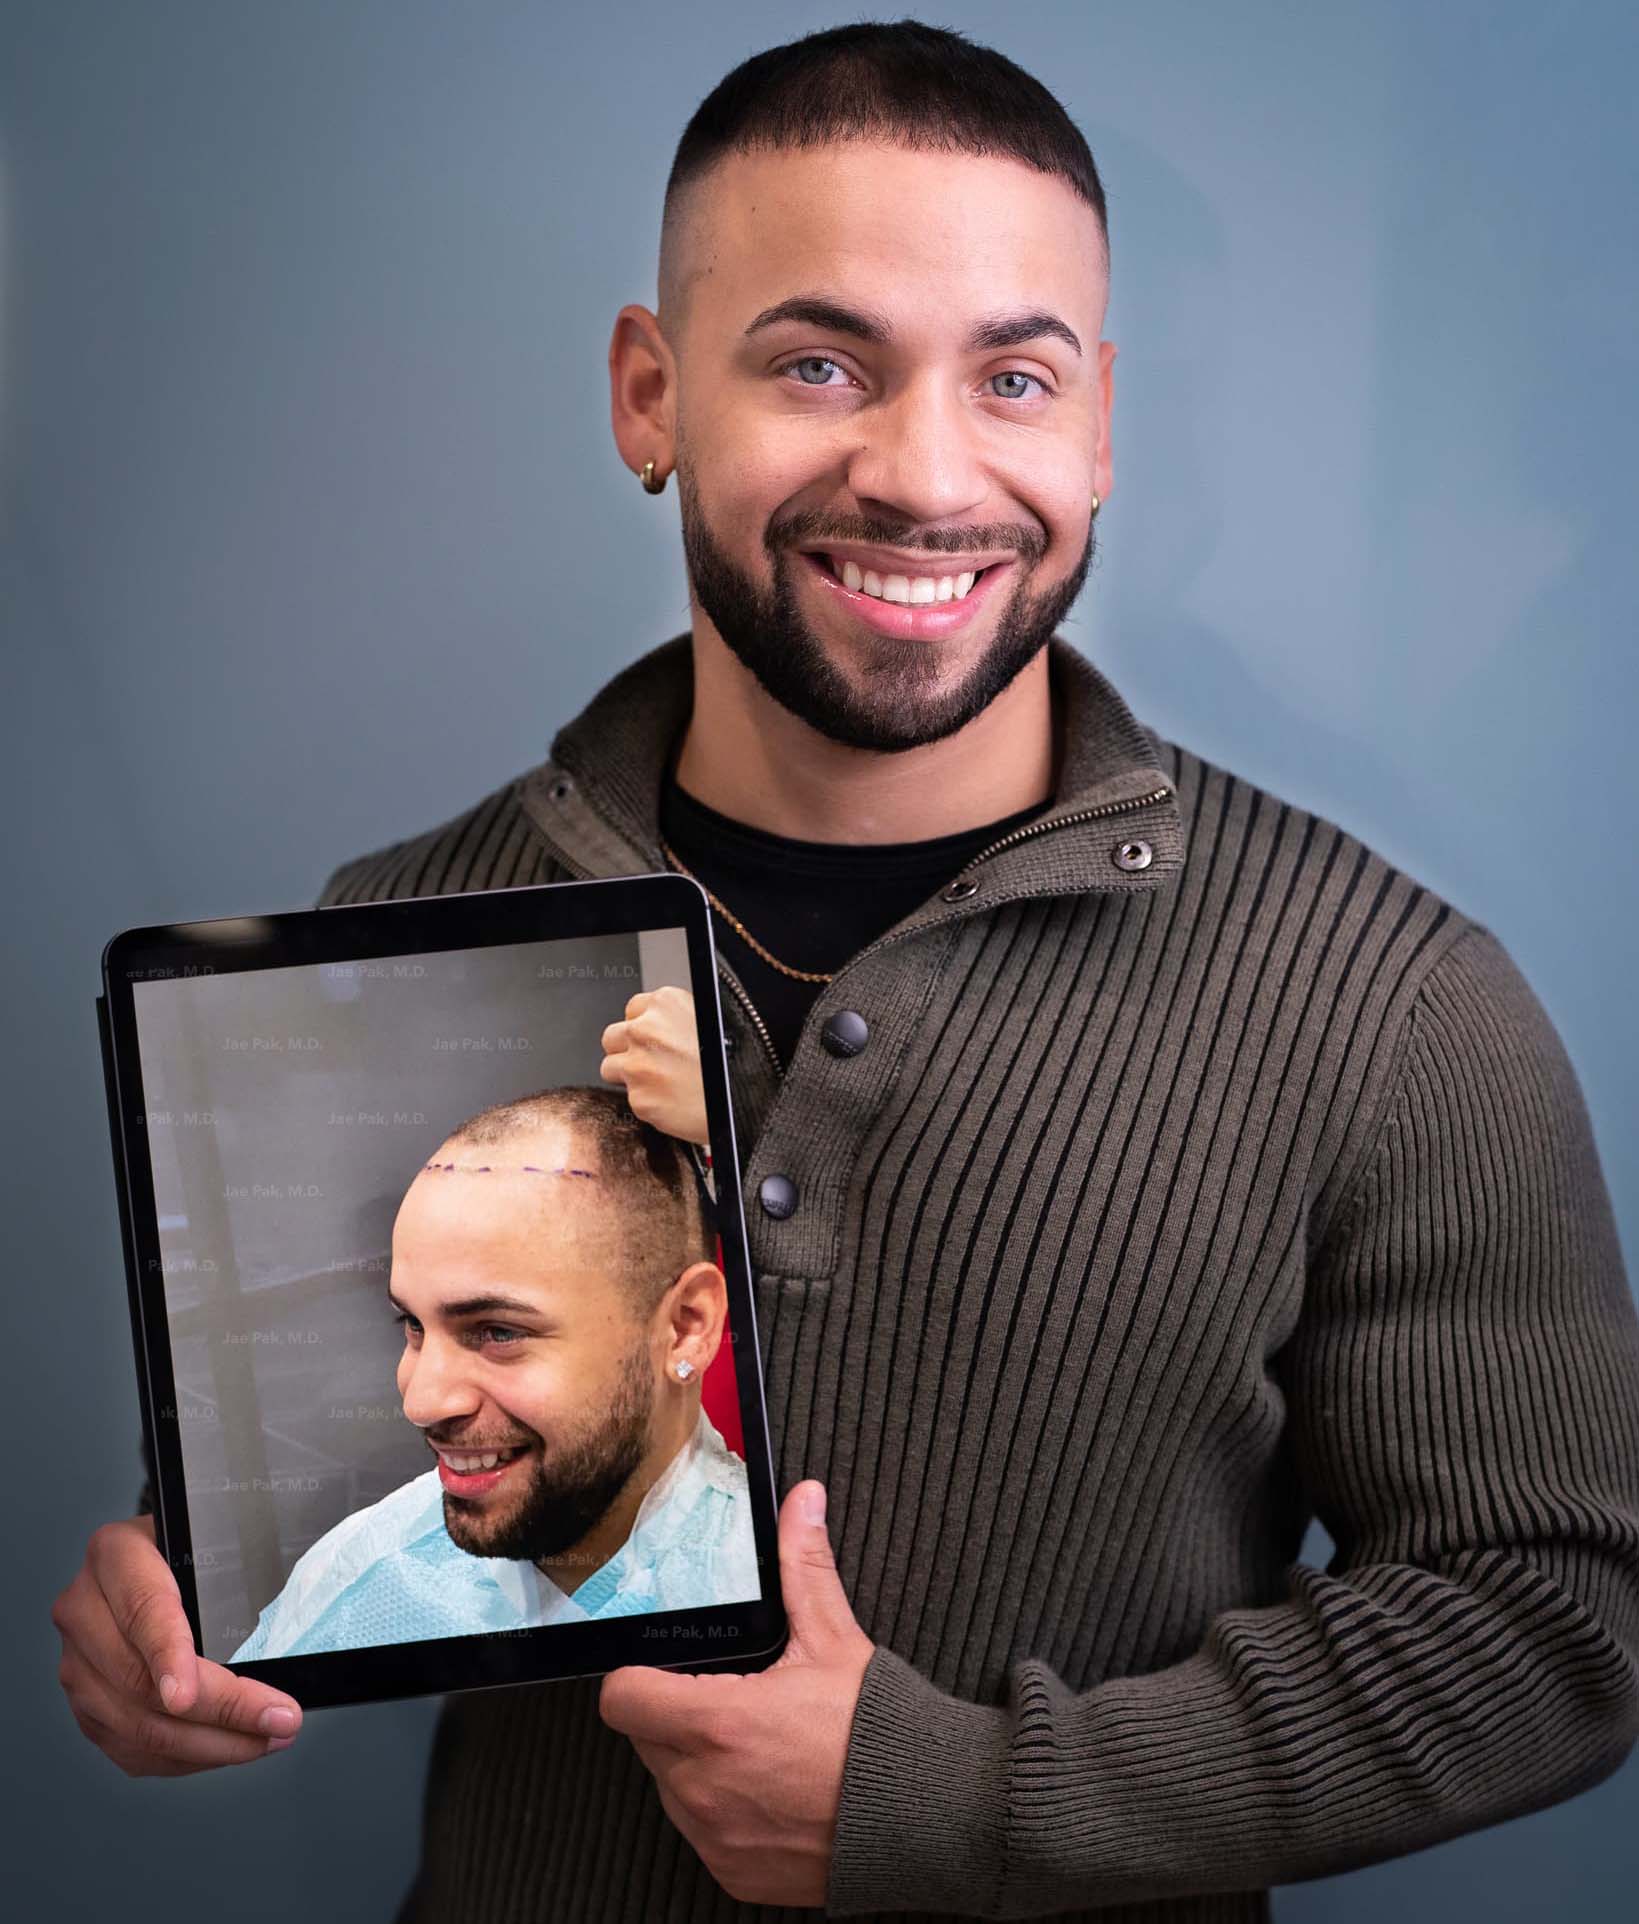 A picture of a man smiling in front of a camera while holding an image of himself while having a hair treatment